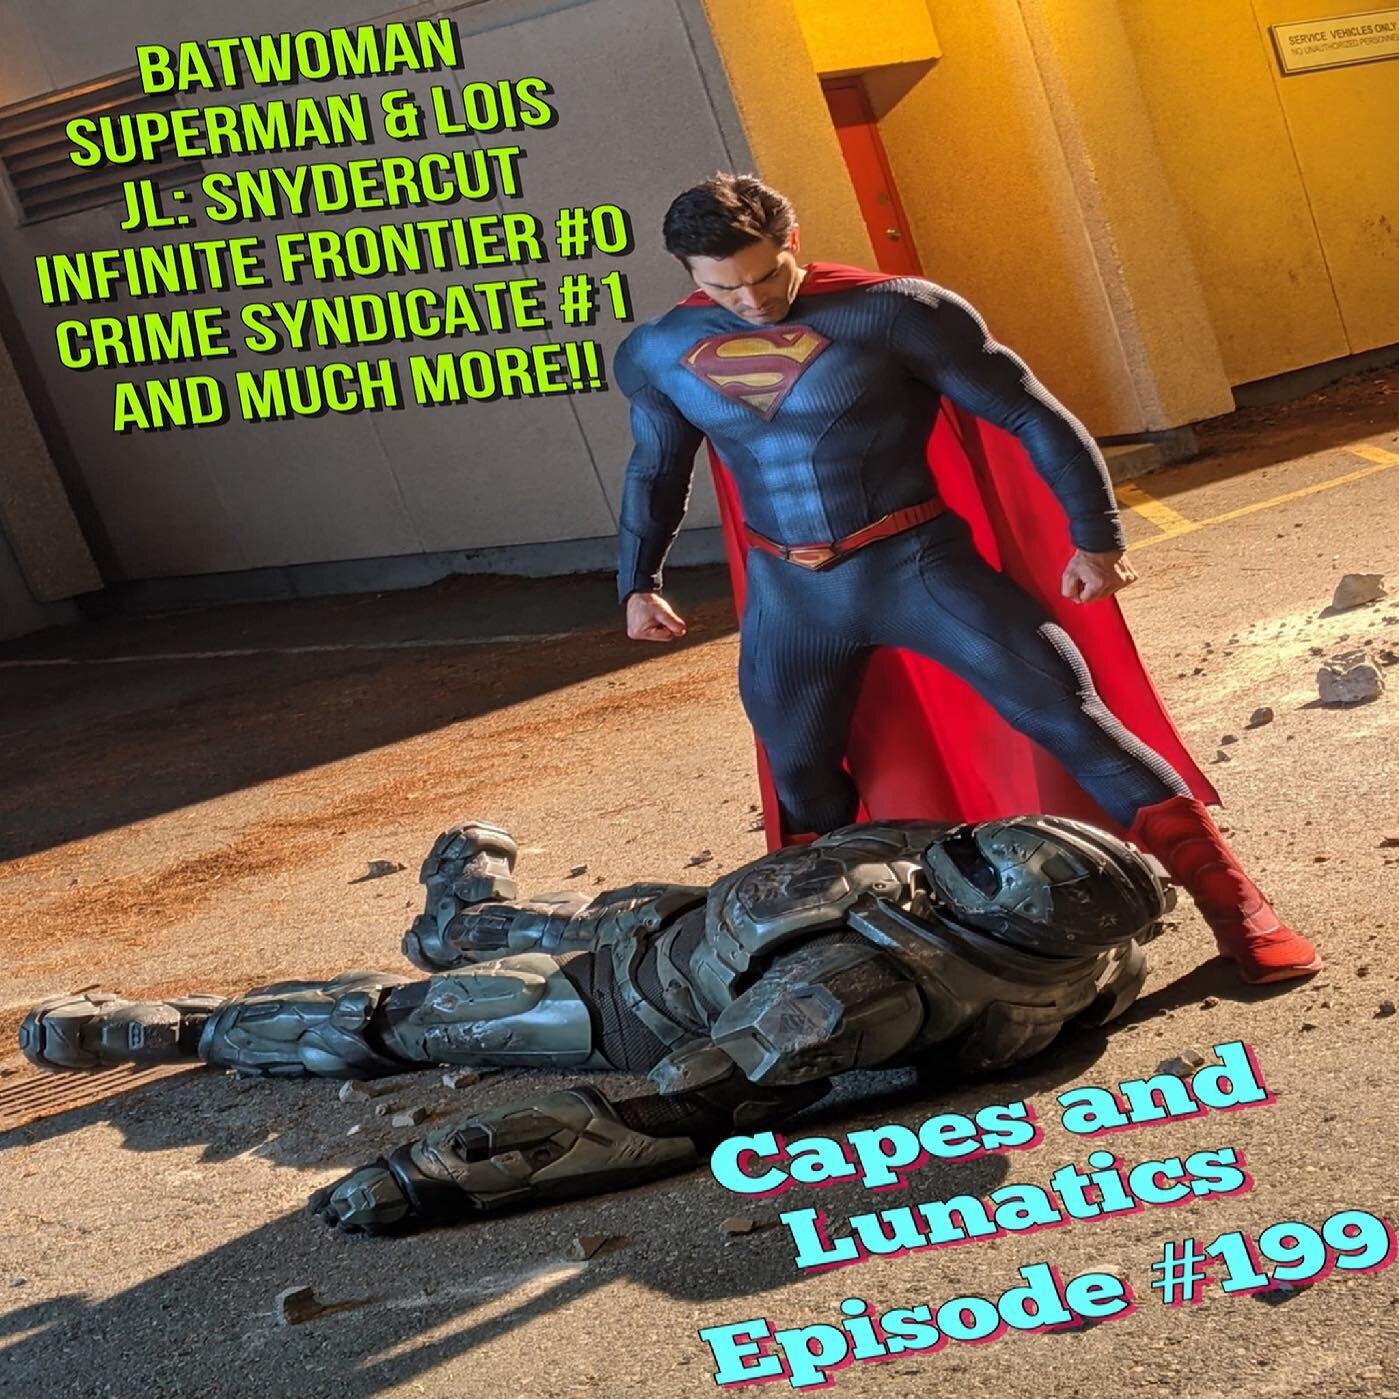 Capes and Lunatics #podcast episode #198! Your geek guides @nightwingpdp @superconnectivity and @lilithhellfire86 discuss #batwoman #supermanandlois #justiceleaguesnydercut #wonderwoman1984 and new comics including #champions #nuclearfamily #brzrkr #